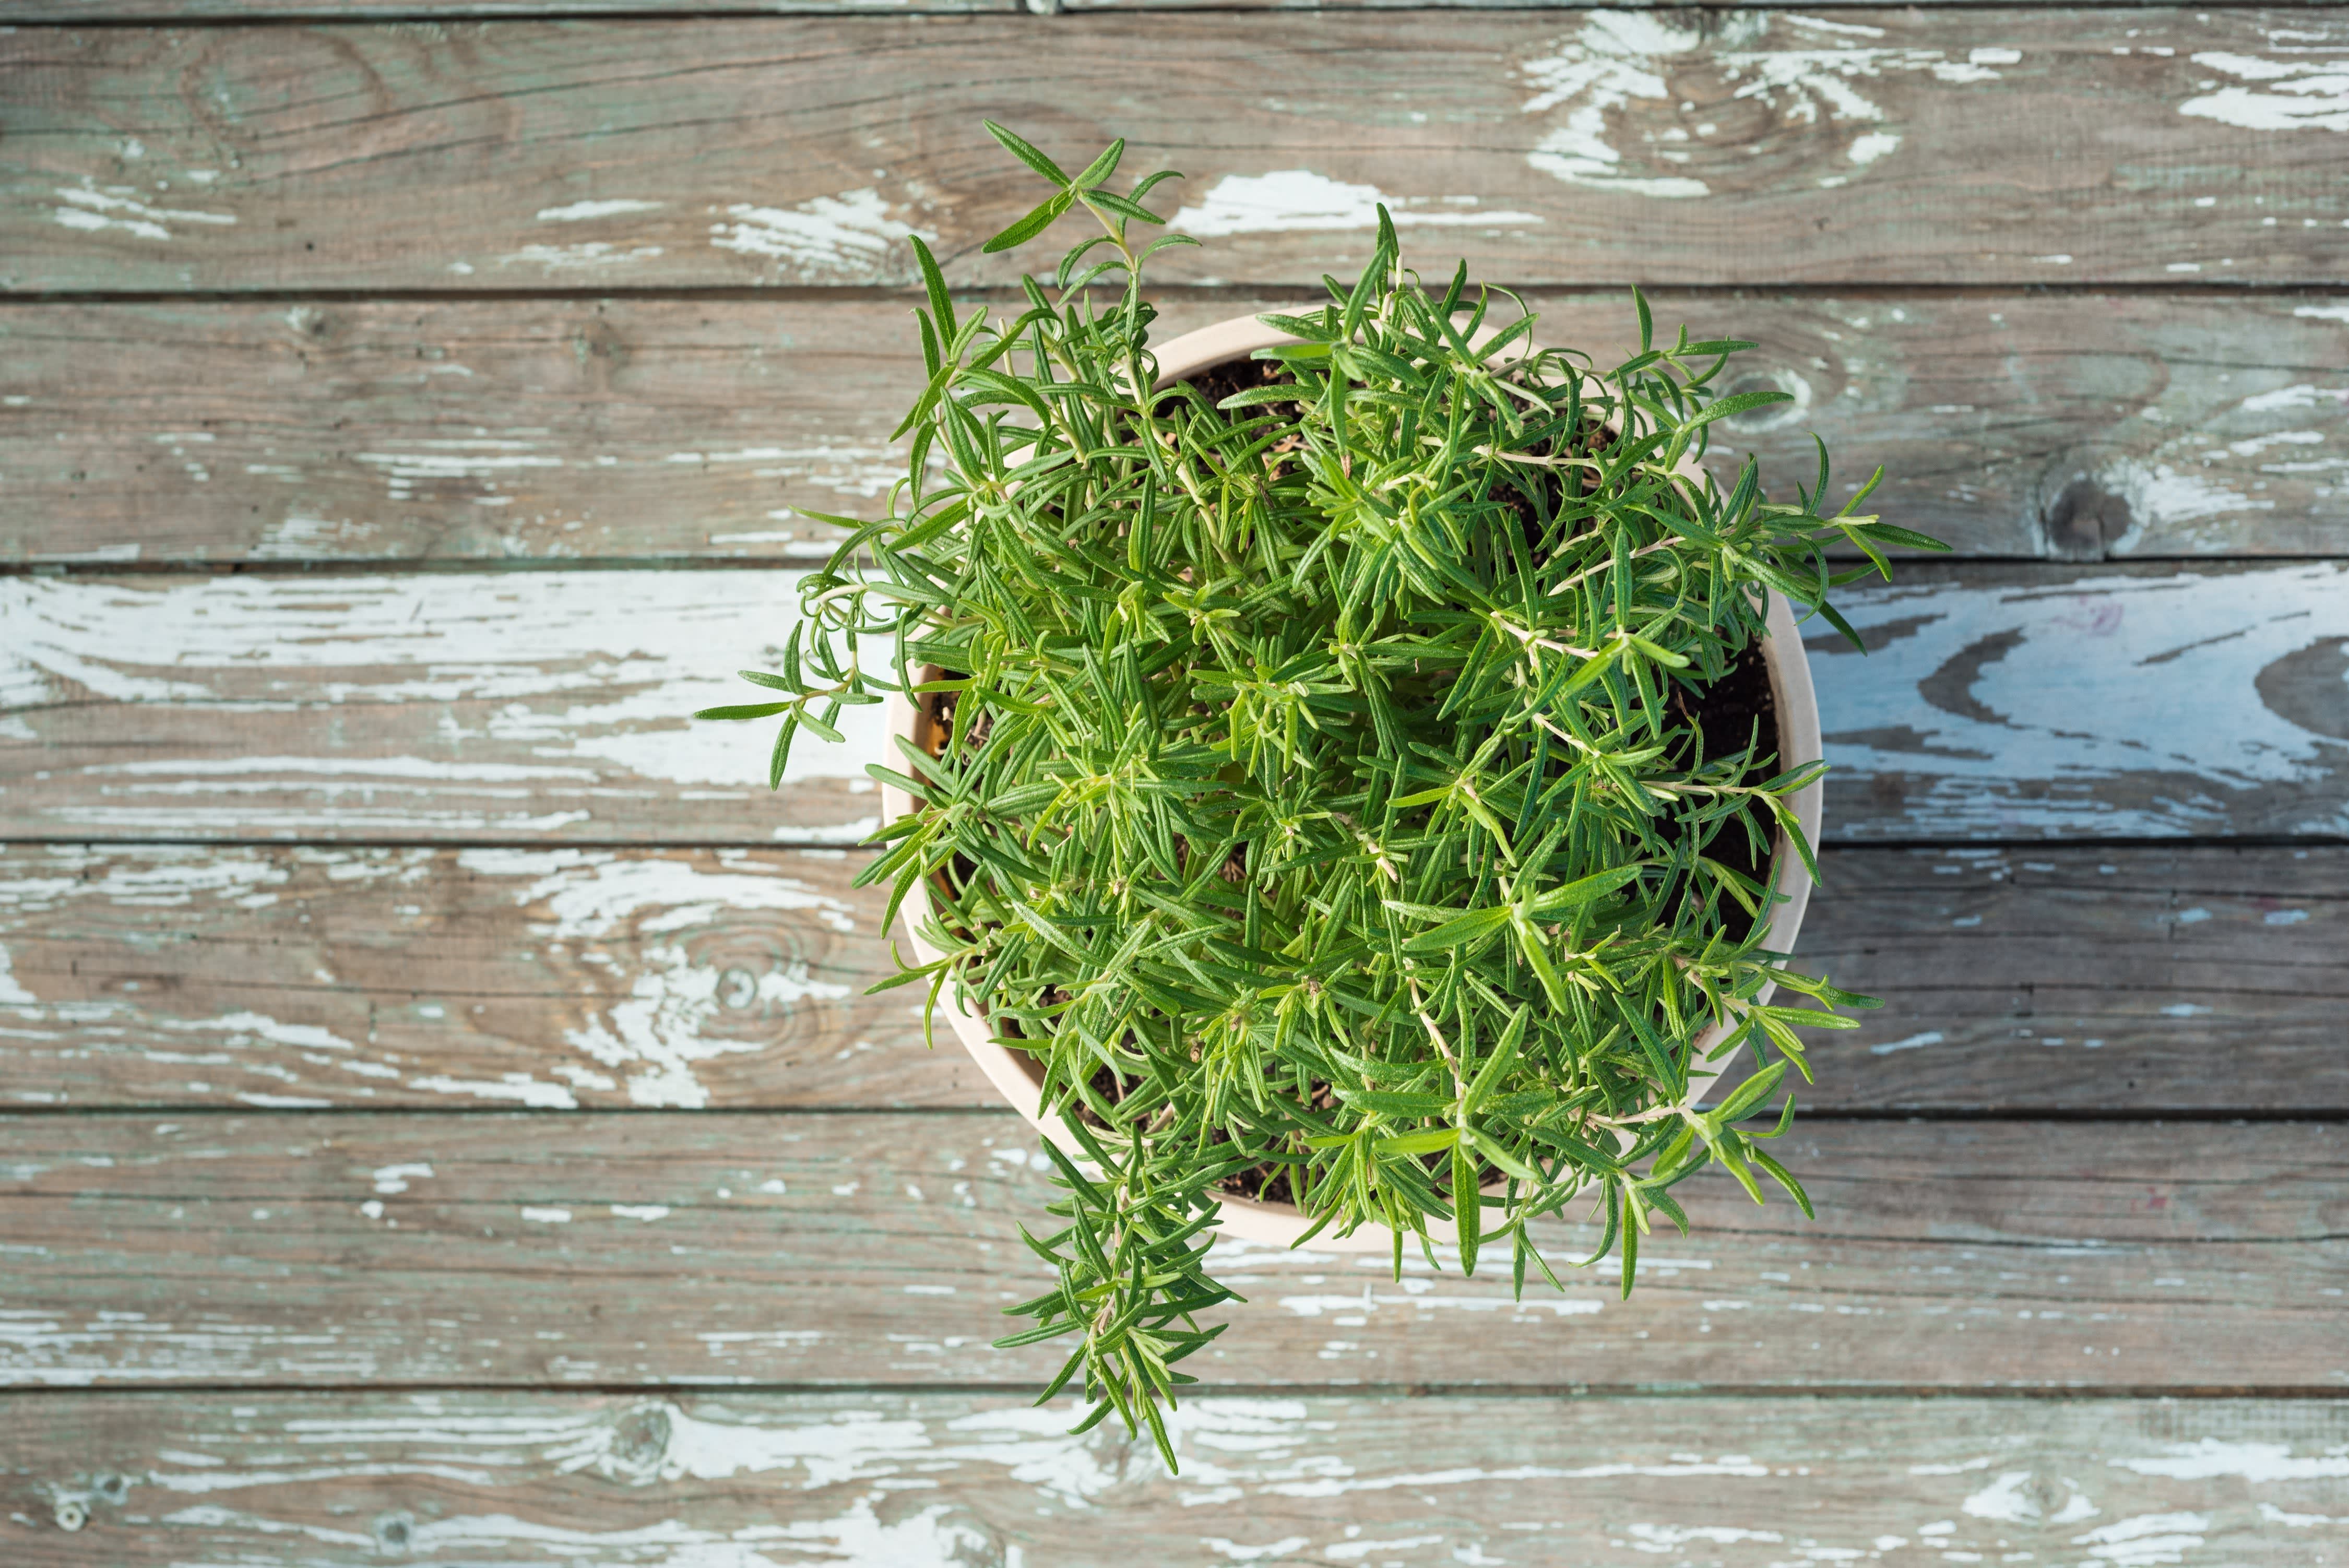 Rosemary Plant Care - How to Grow Rosemary Indoors